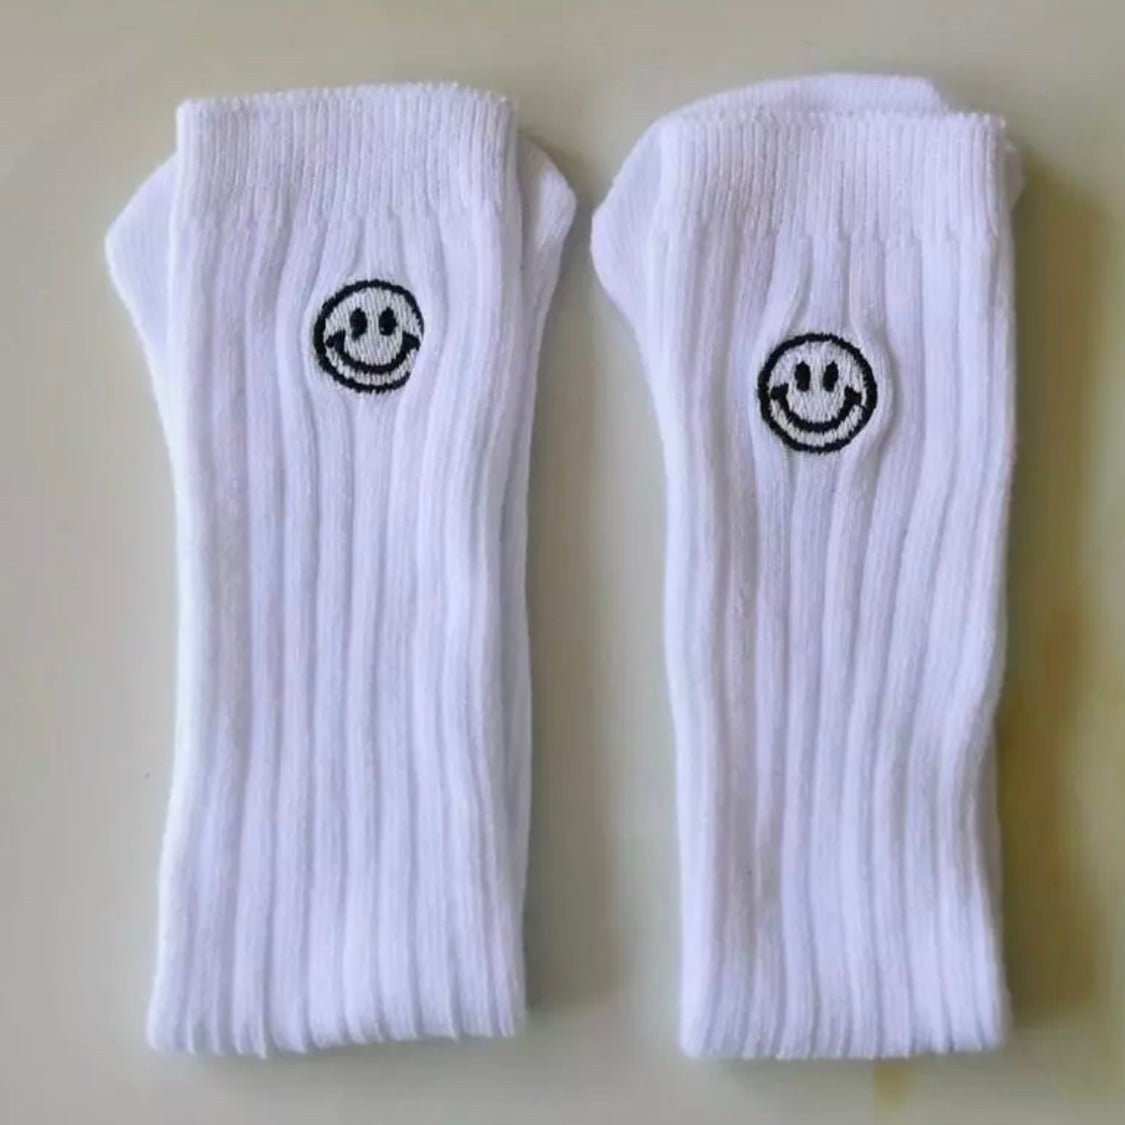 Smile Socks - Mommy &amp; me find Stylish Fashion for Little People- at Little Foxx Concept Store